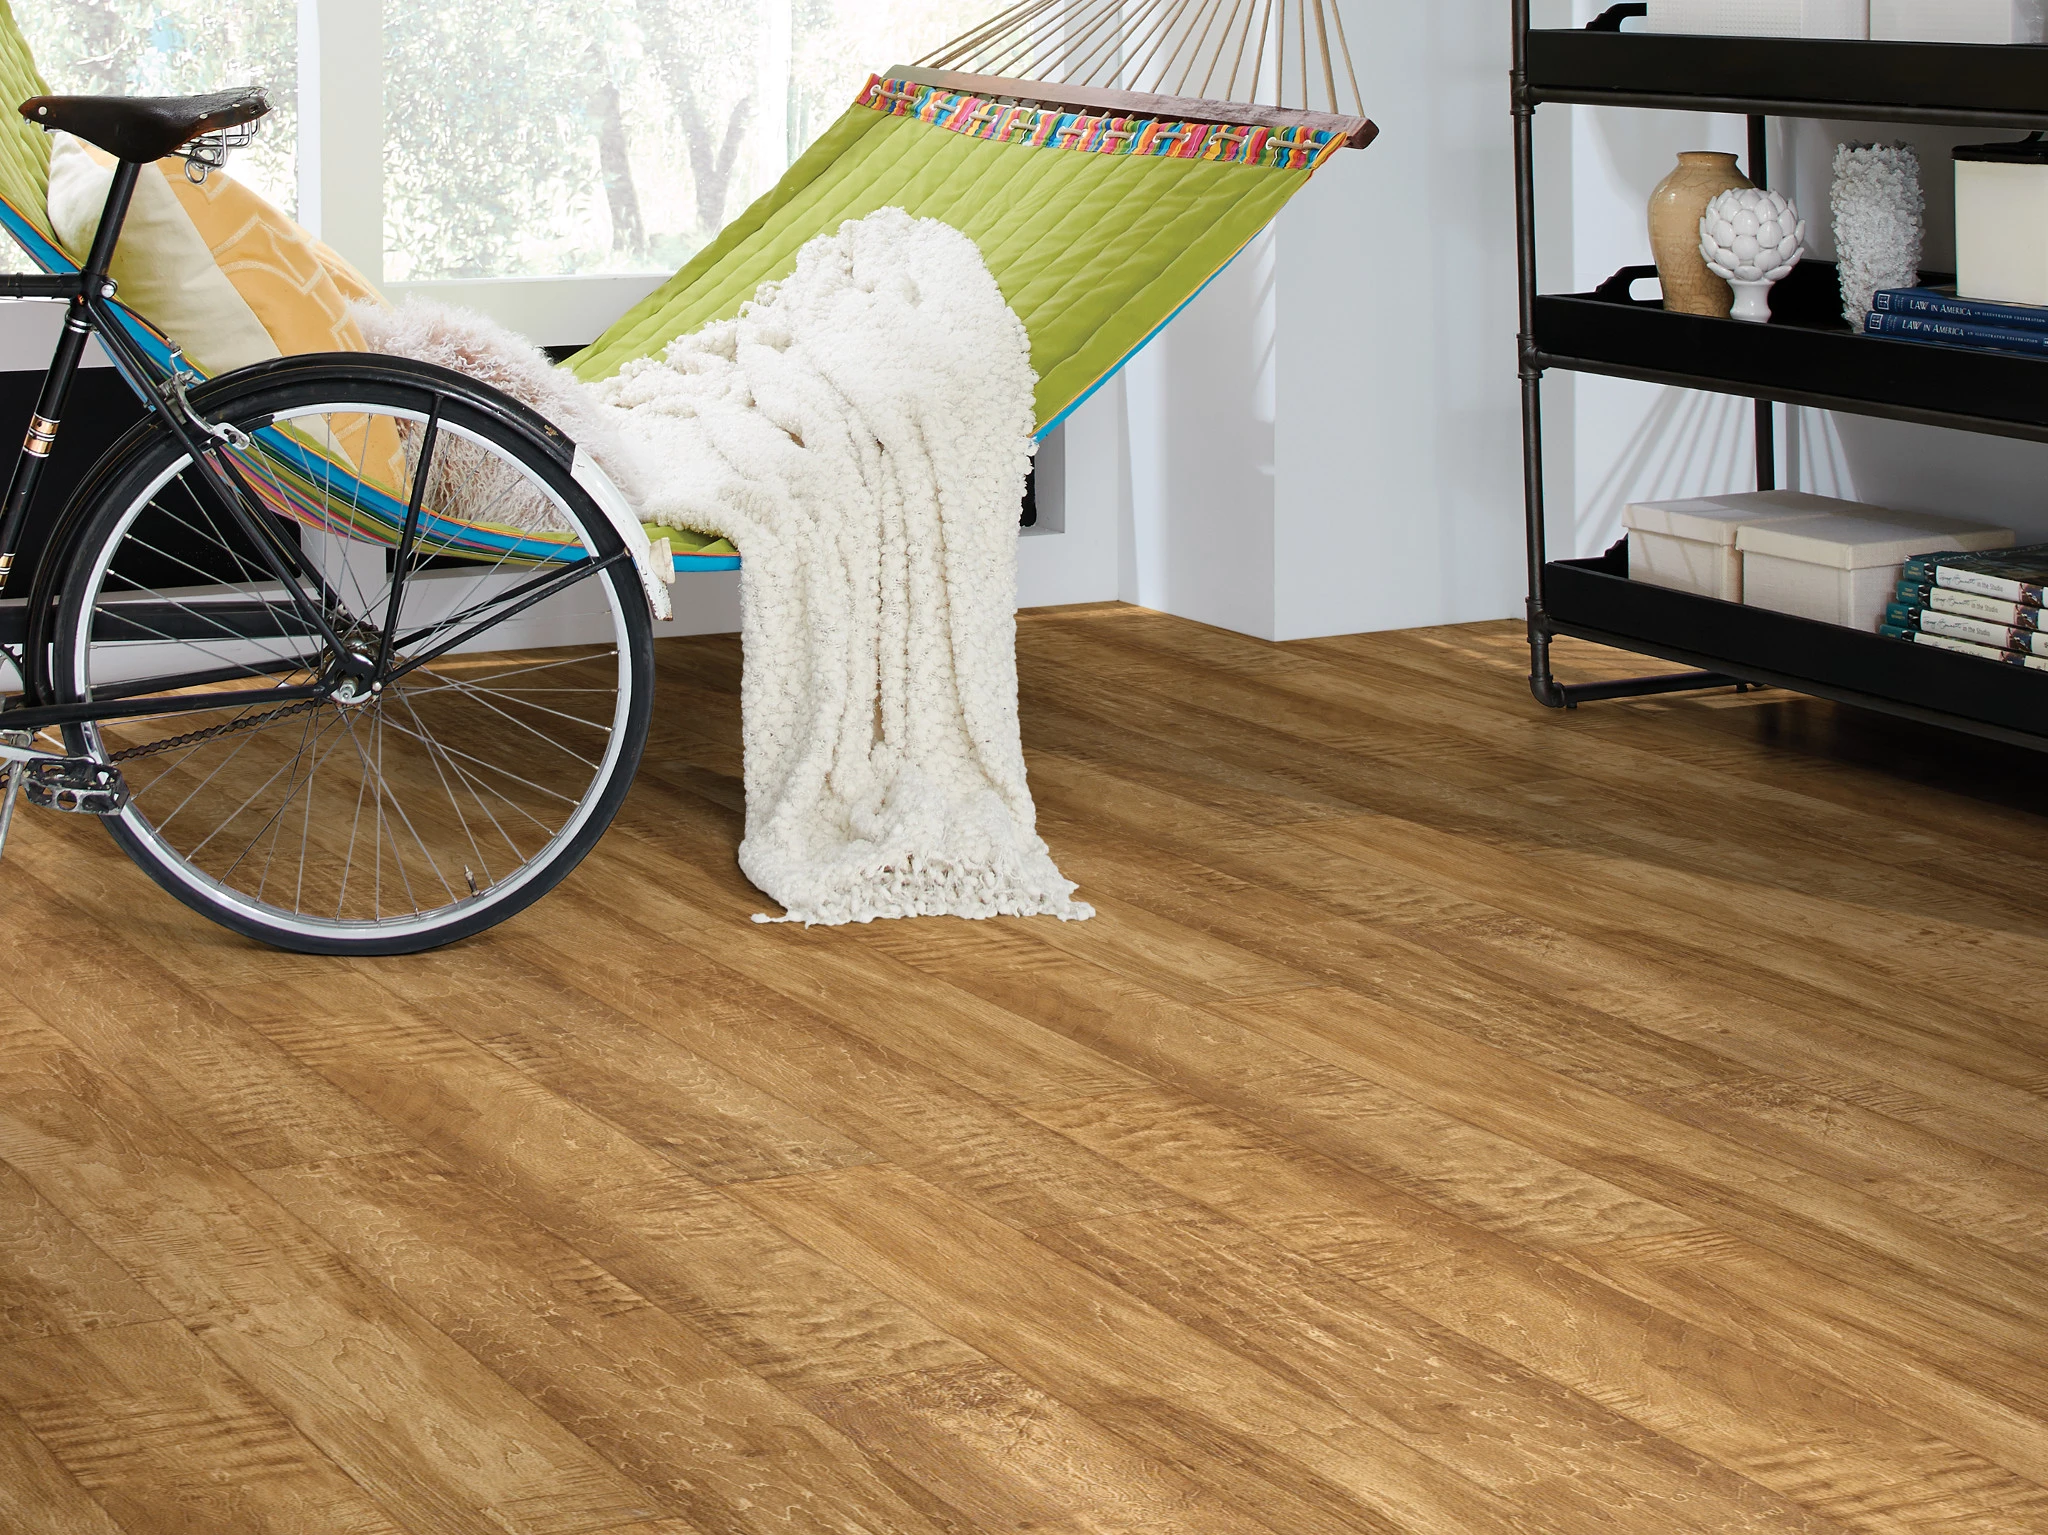 How To Clean Vinyl Flooring Shaw Floors, Shaw Laminate Flooring Cleaning